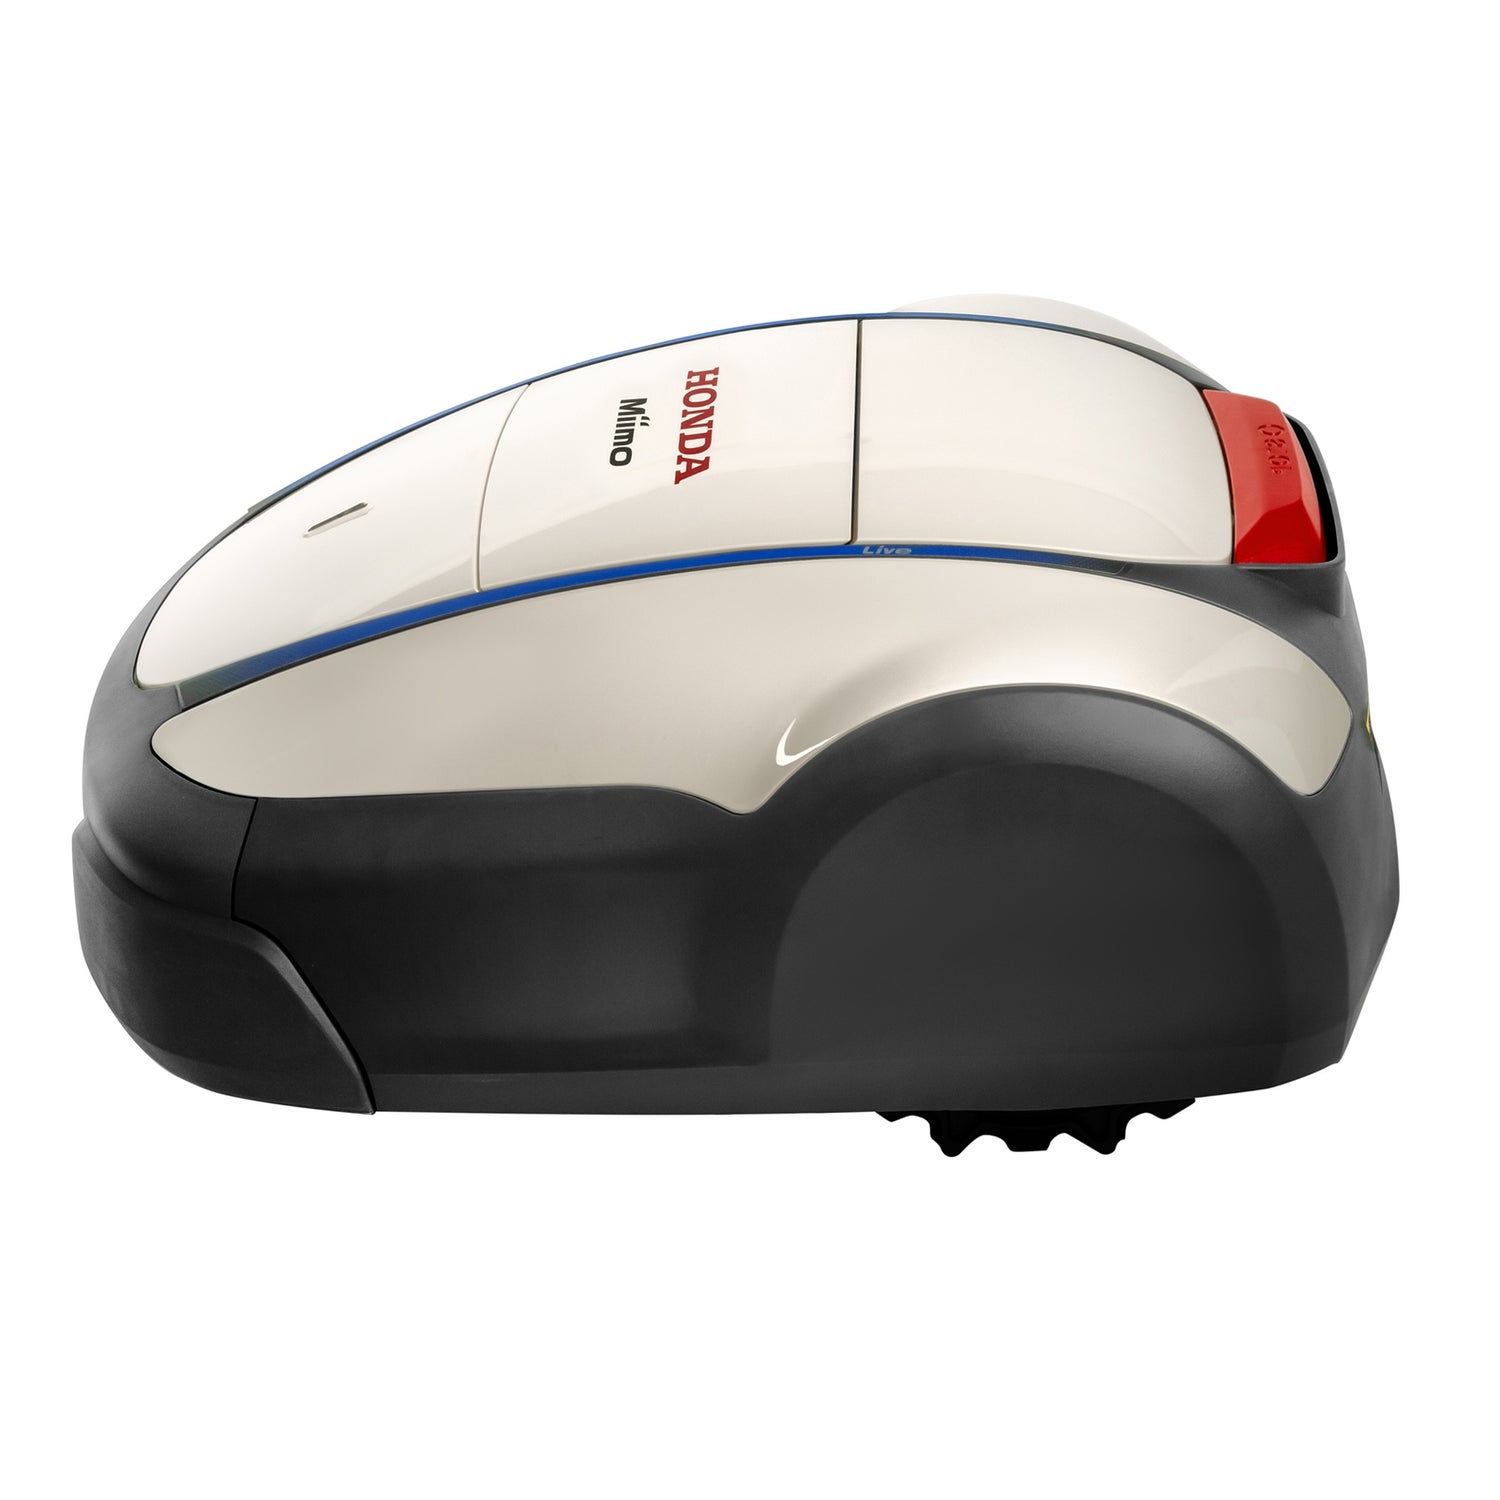 Miimo 4000 Live Robotic Lawnmower (Incl Wire and Pegs)